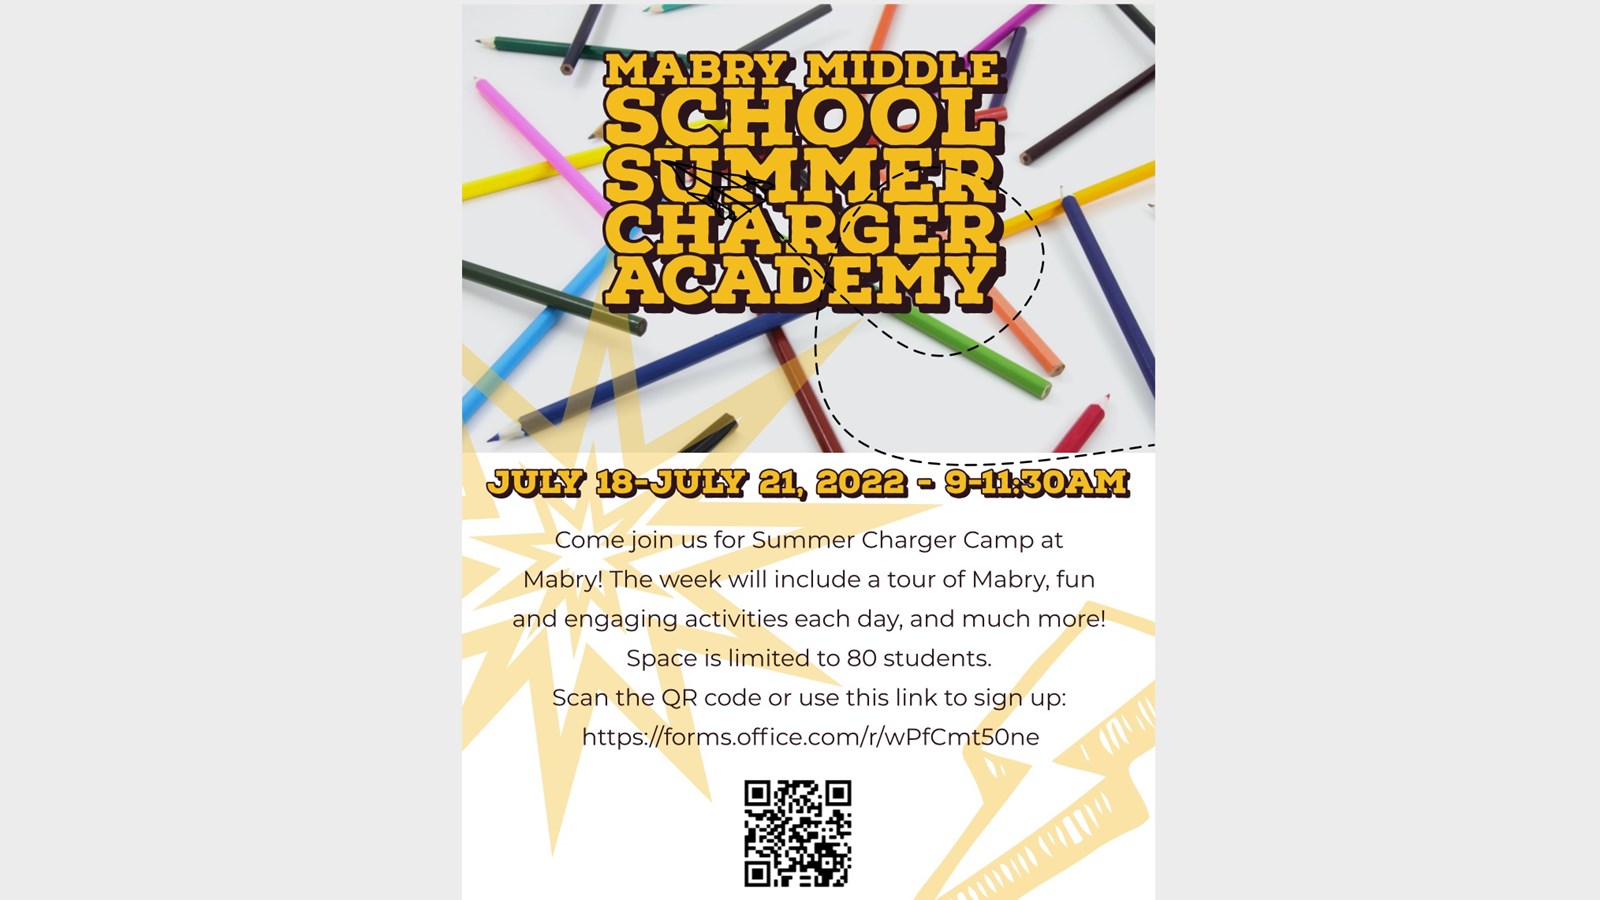 Summer Charger Academy